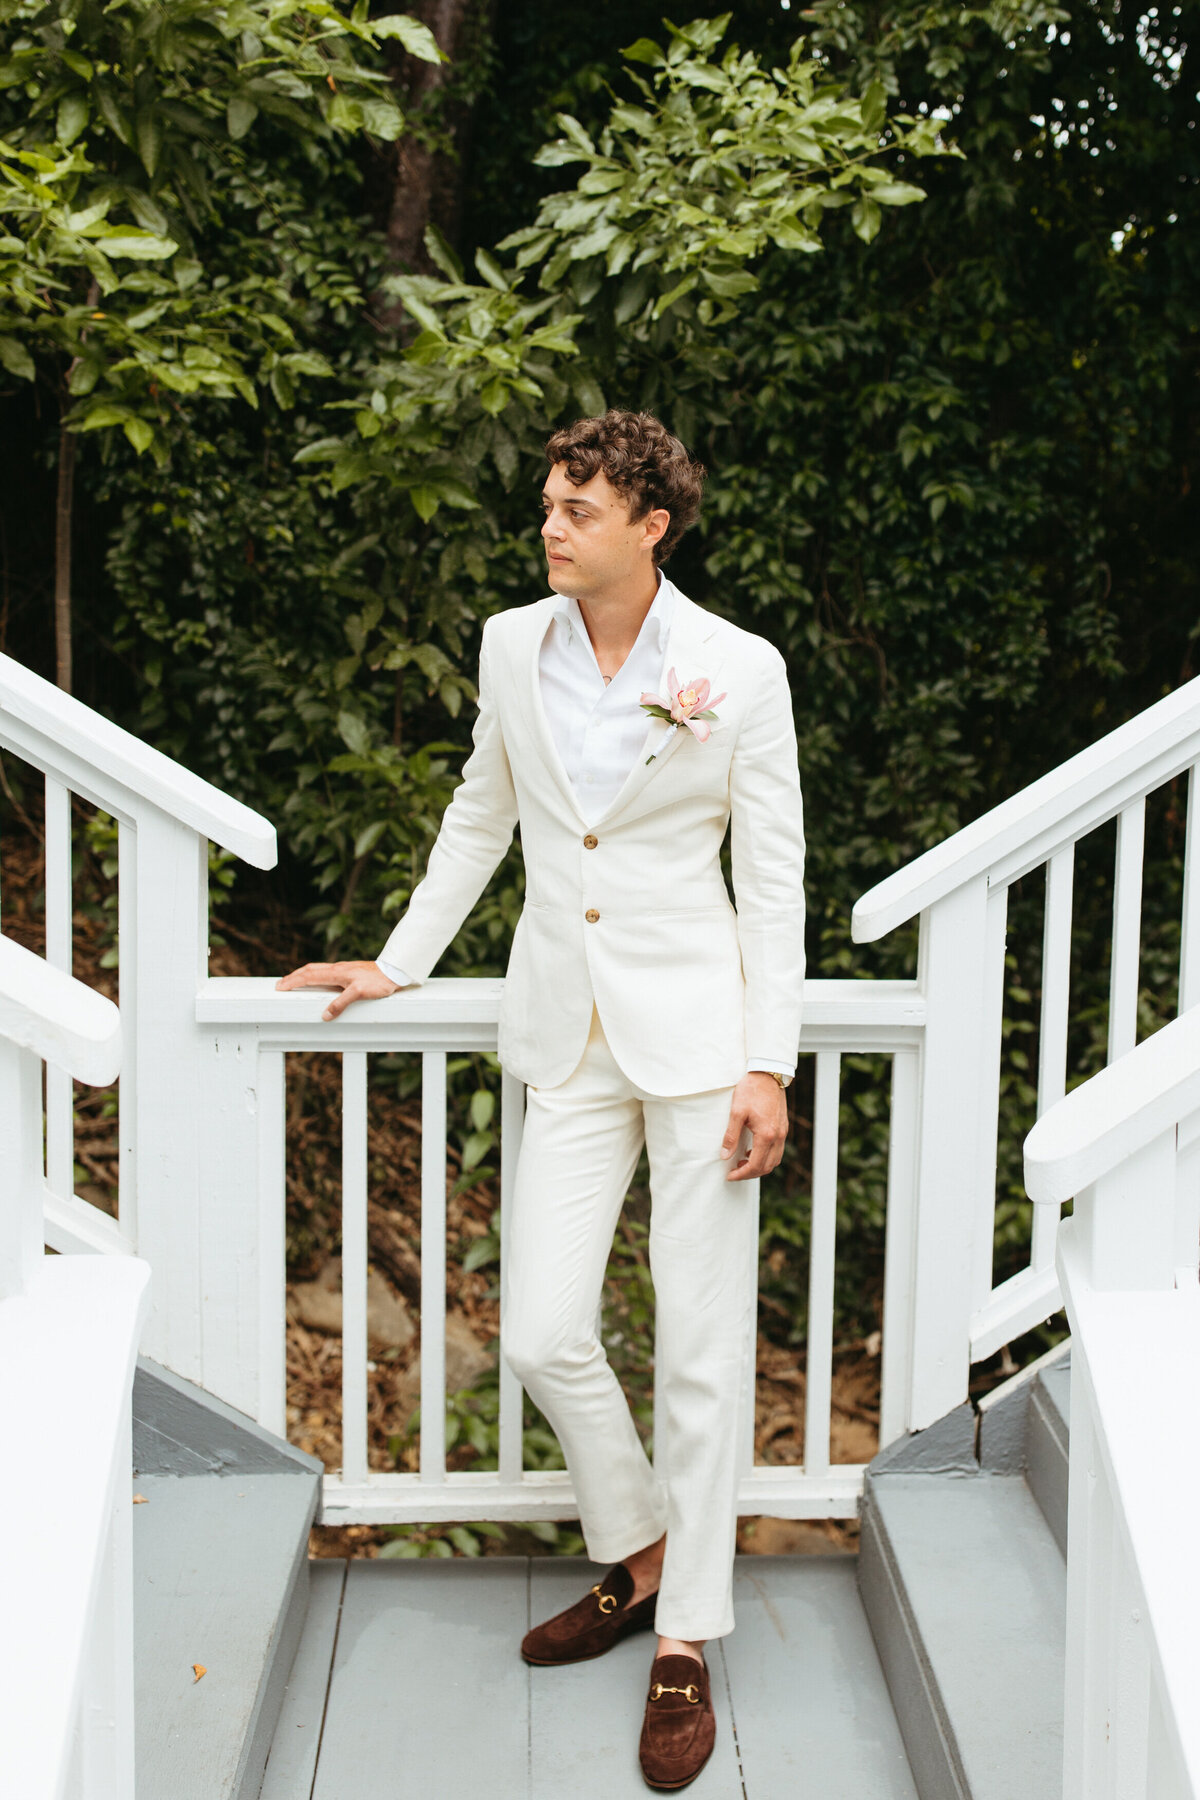 Groom in a chic white suit standing on a porch, looking off into the distance